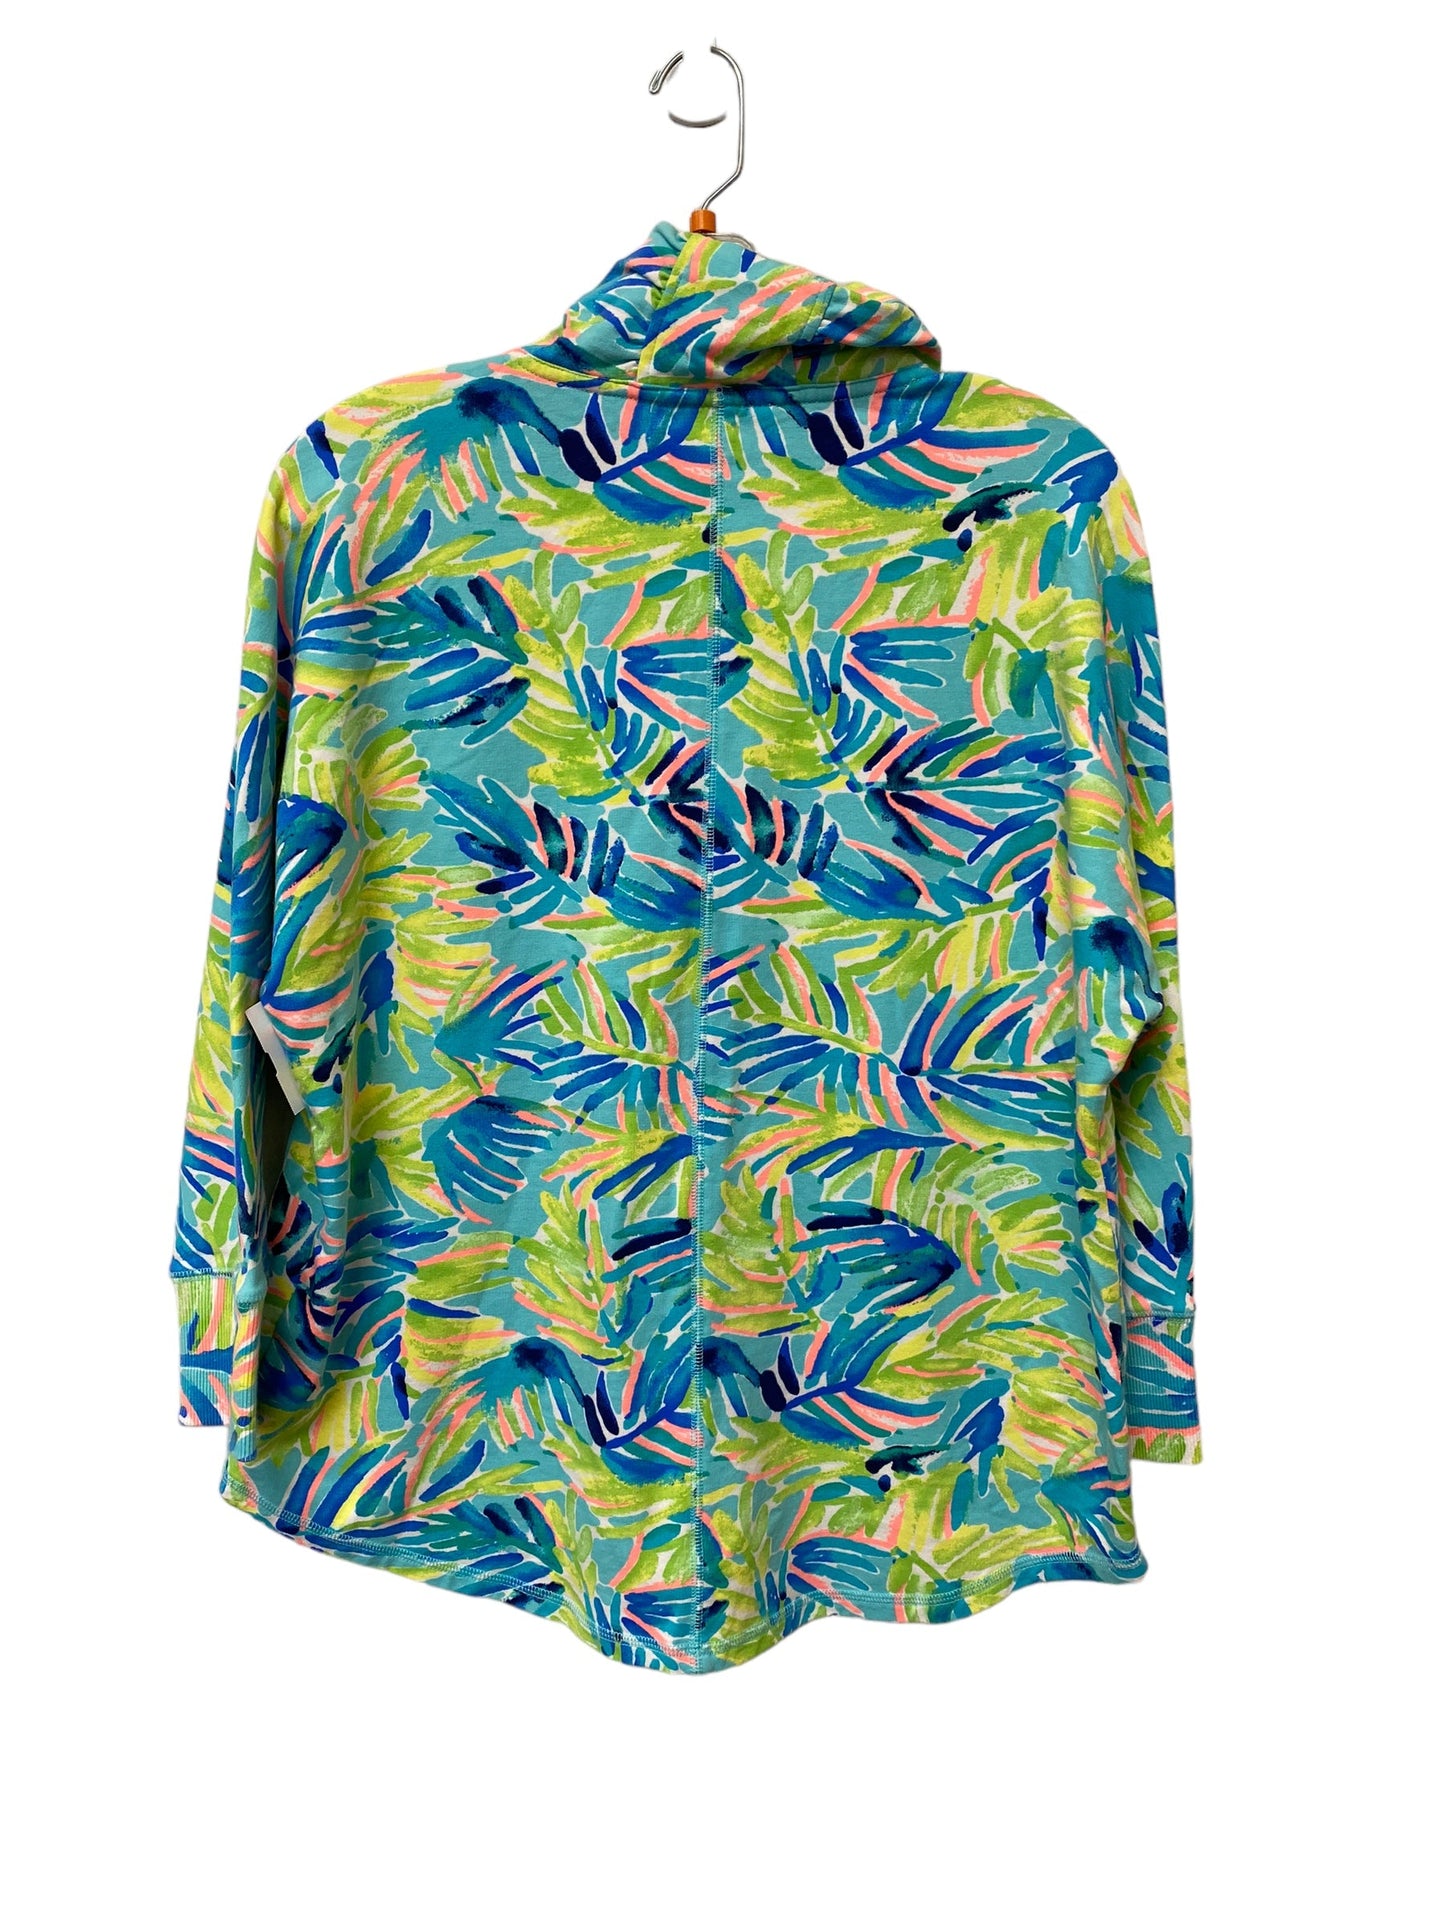 Jacket Other By Lilly Pulitzer  Size: S